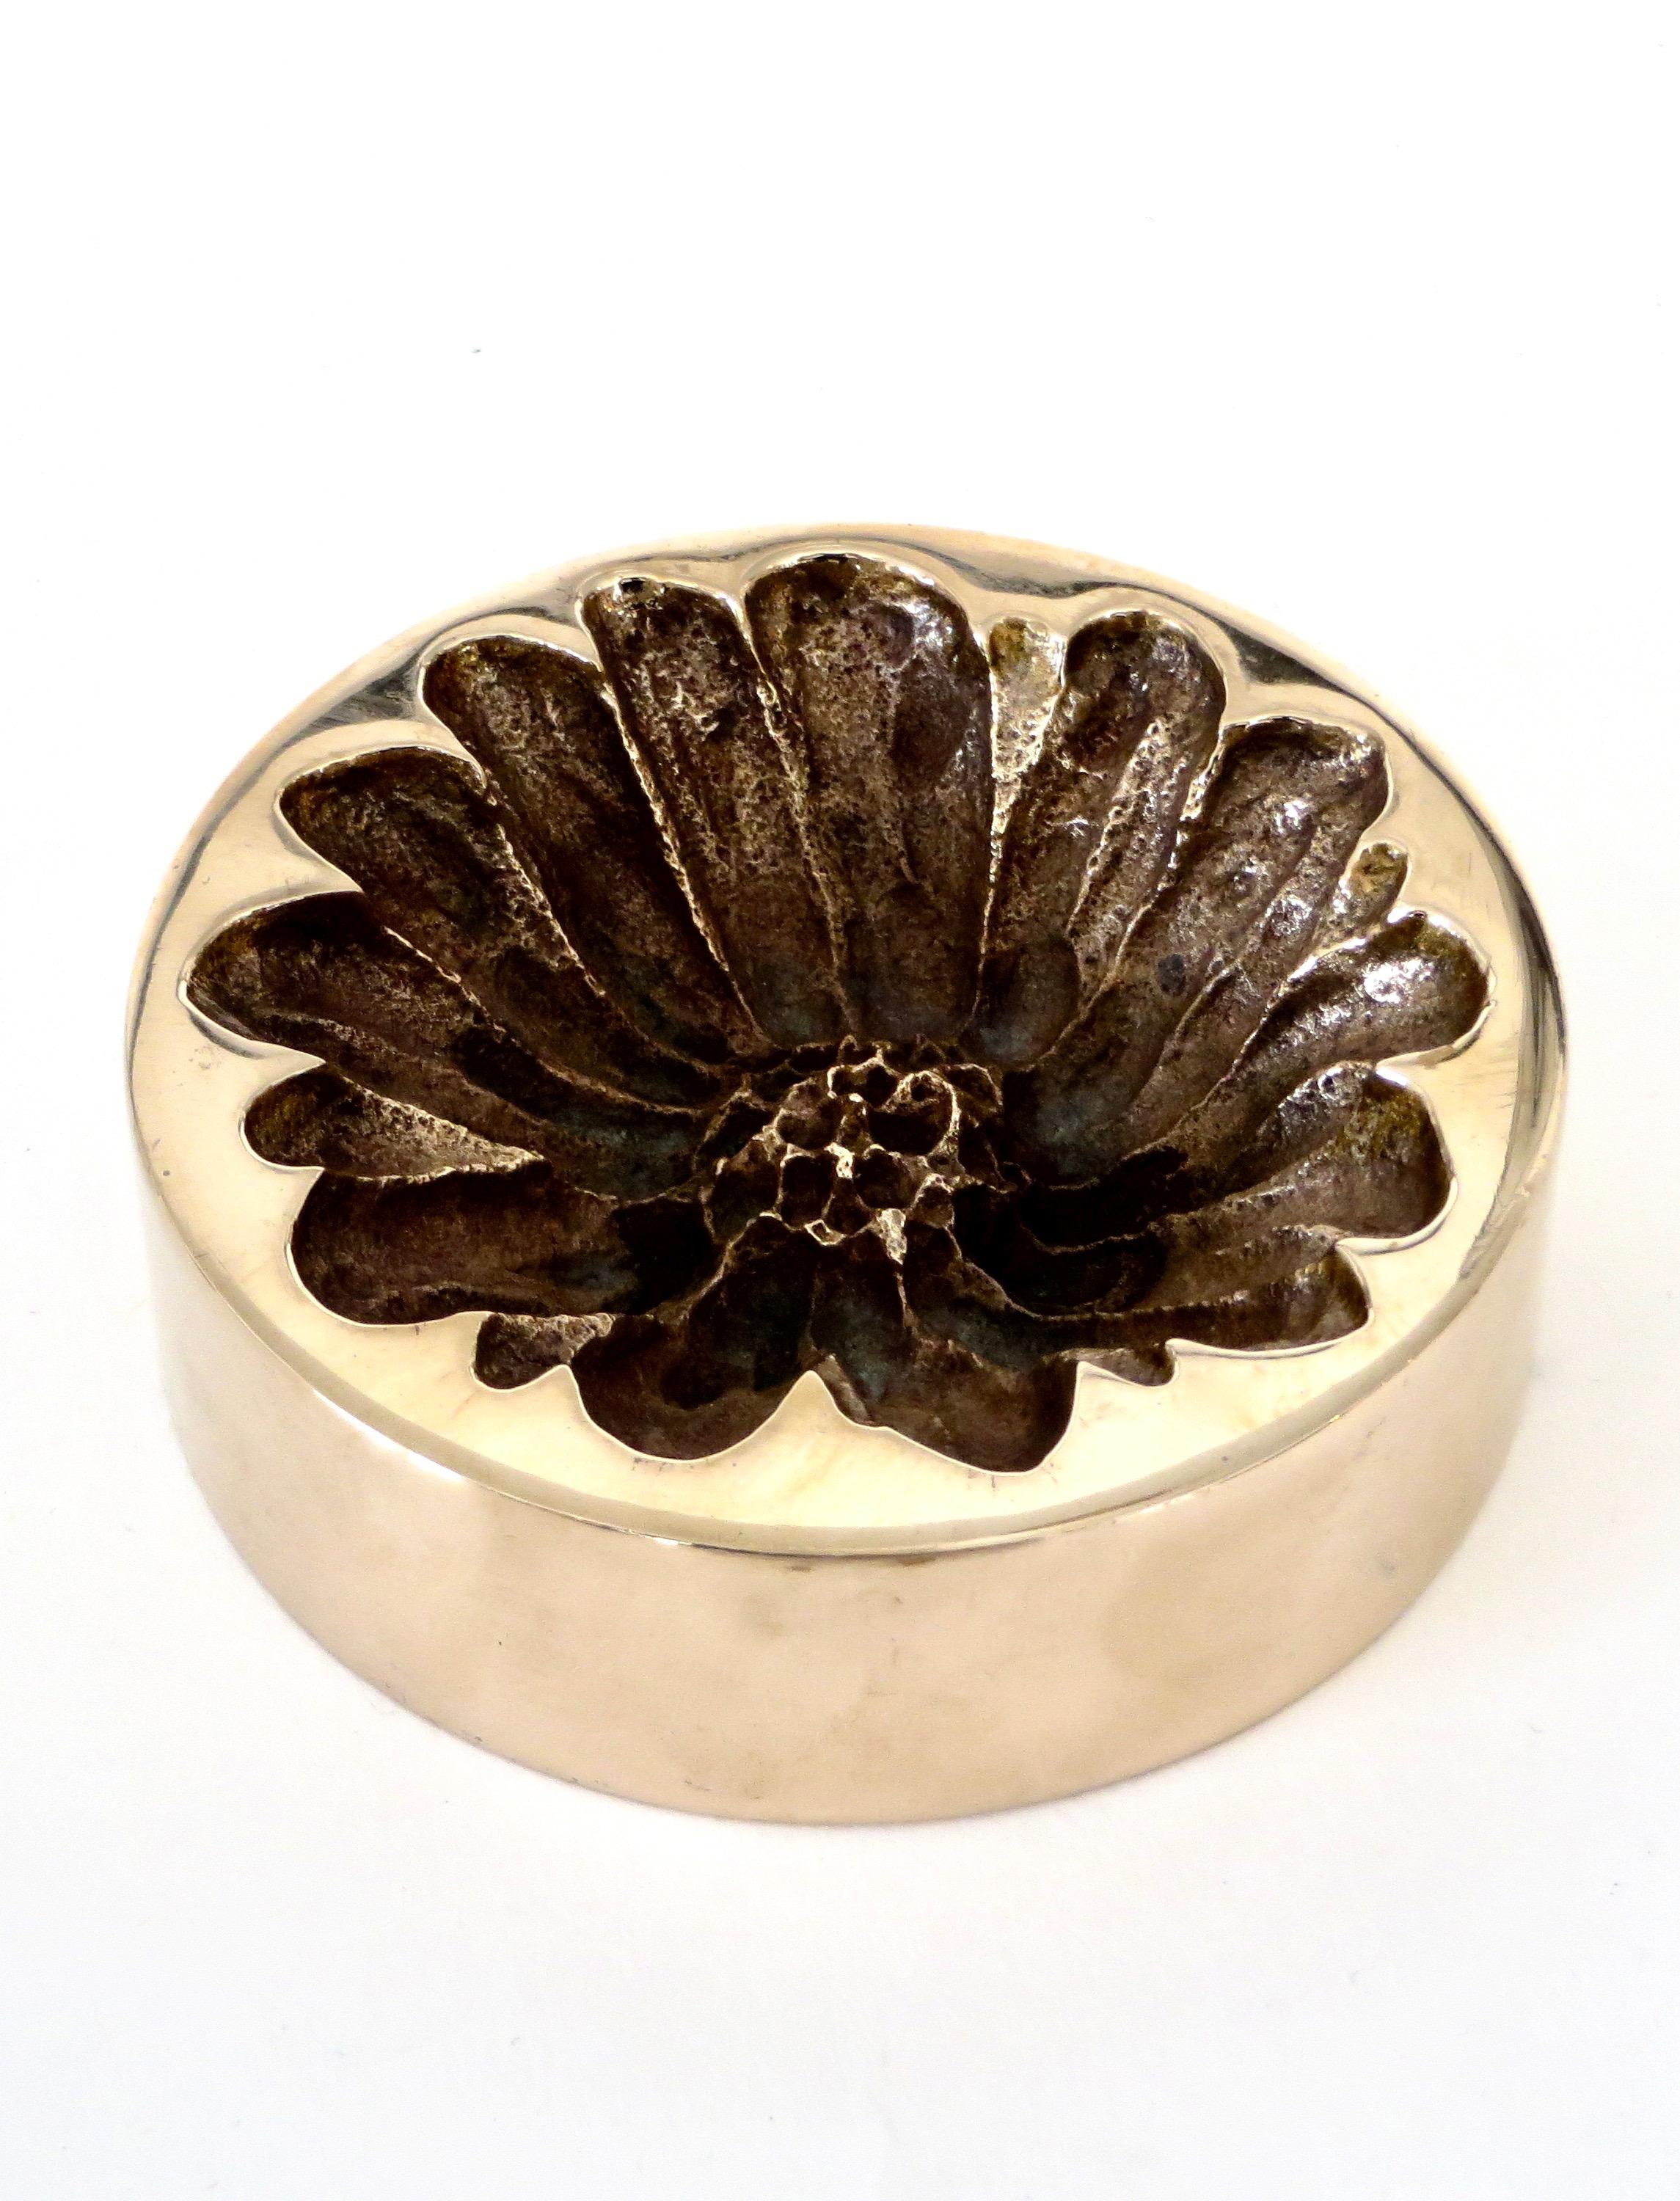 A bronze vide poche or decorative dish by French artist Monique Gerber in the motif of a daisy or marguerite. 
Signed.